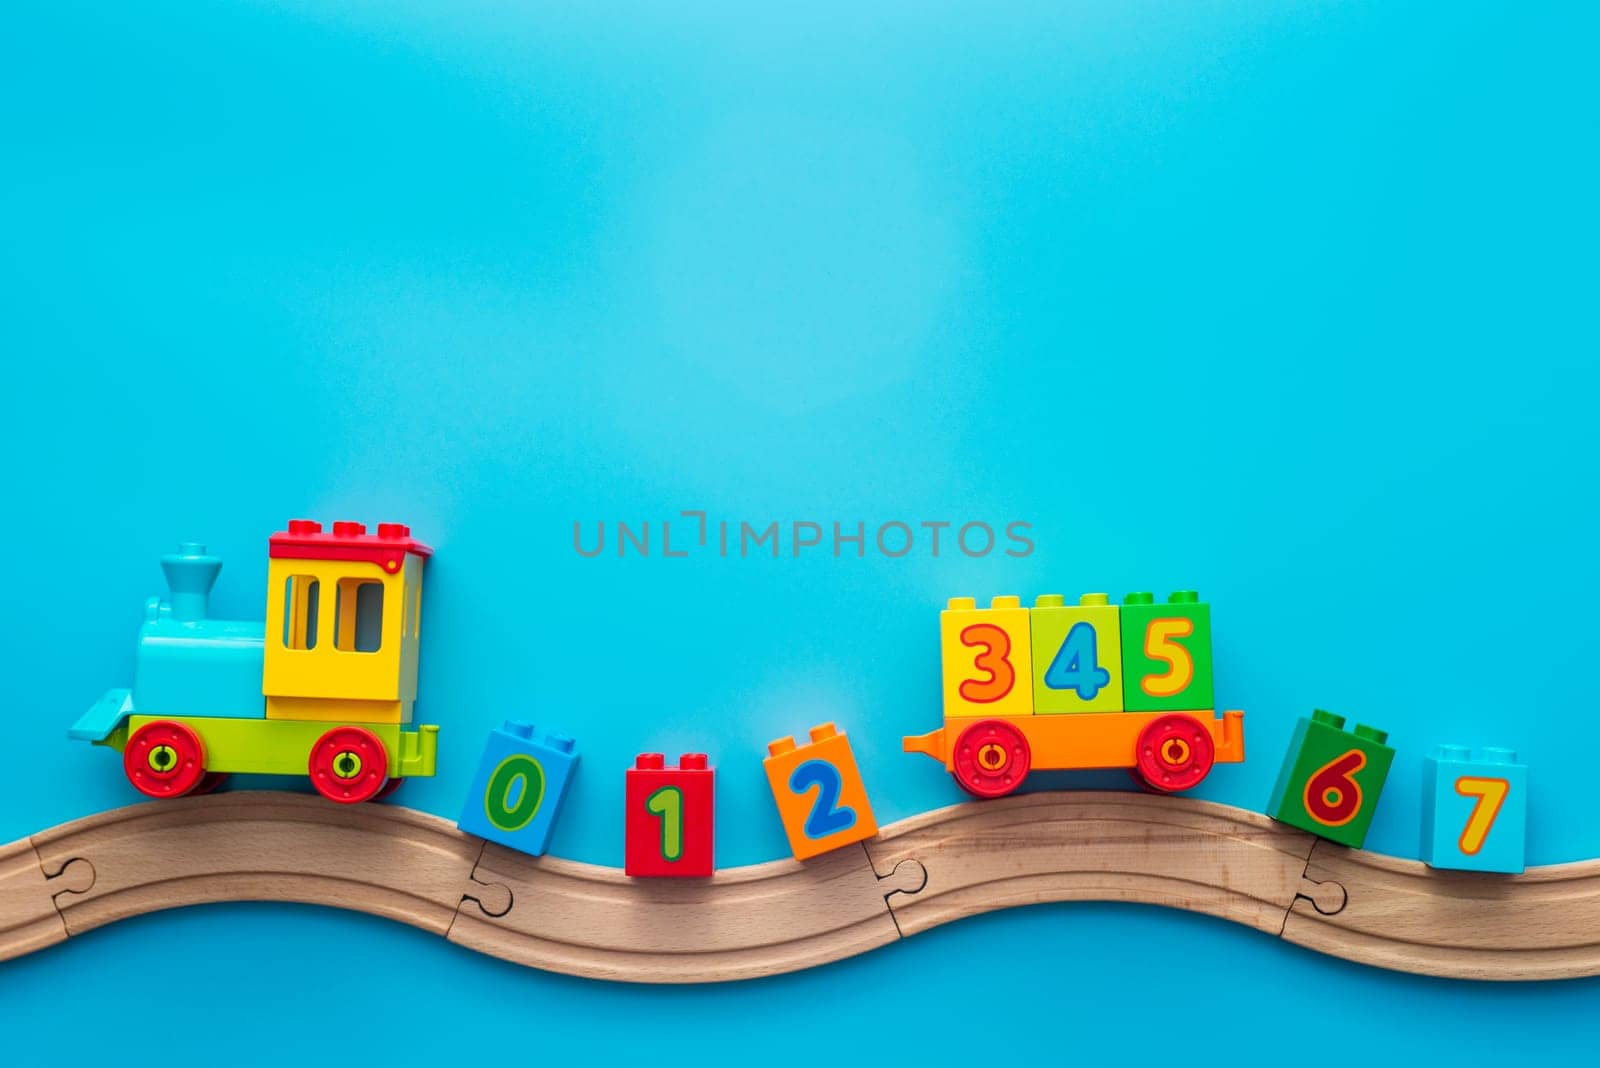 Colorful toy train locomotive with numbers on wooden railway on blue background. Kids toys background banner. Early childhood education, learning to count, preschool and kids game concept.